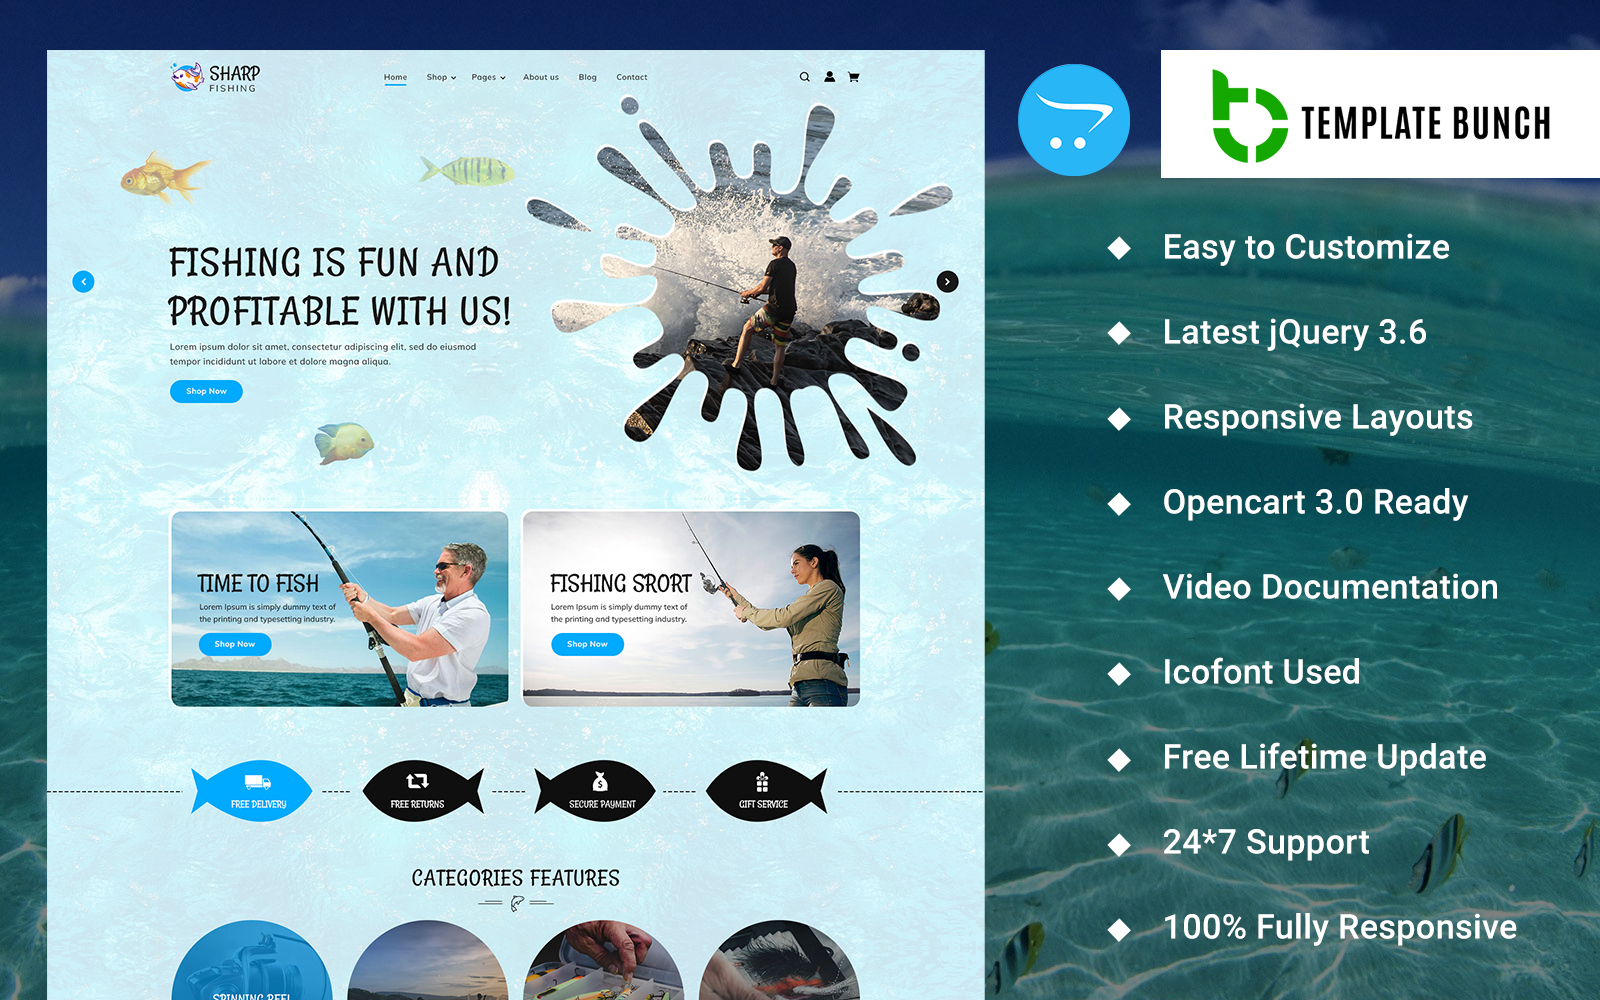 Sharp Fishing - eCommerce Themes and Templates on opencart